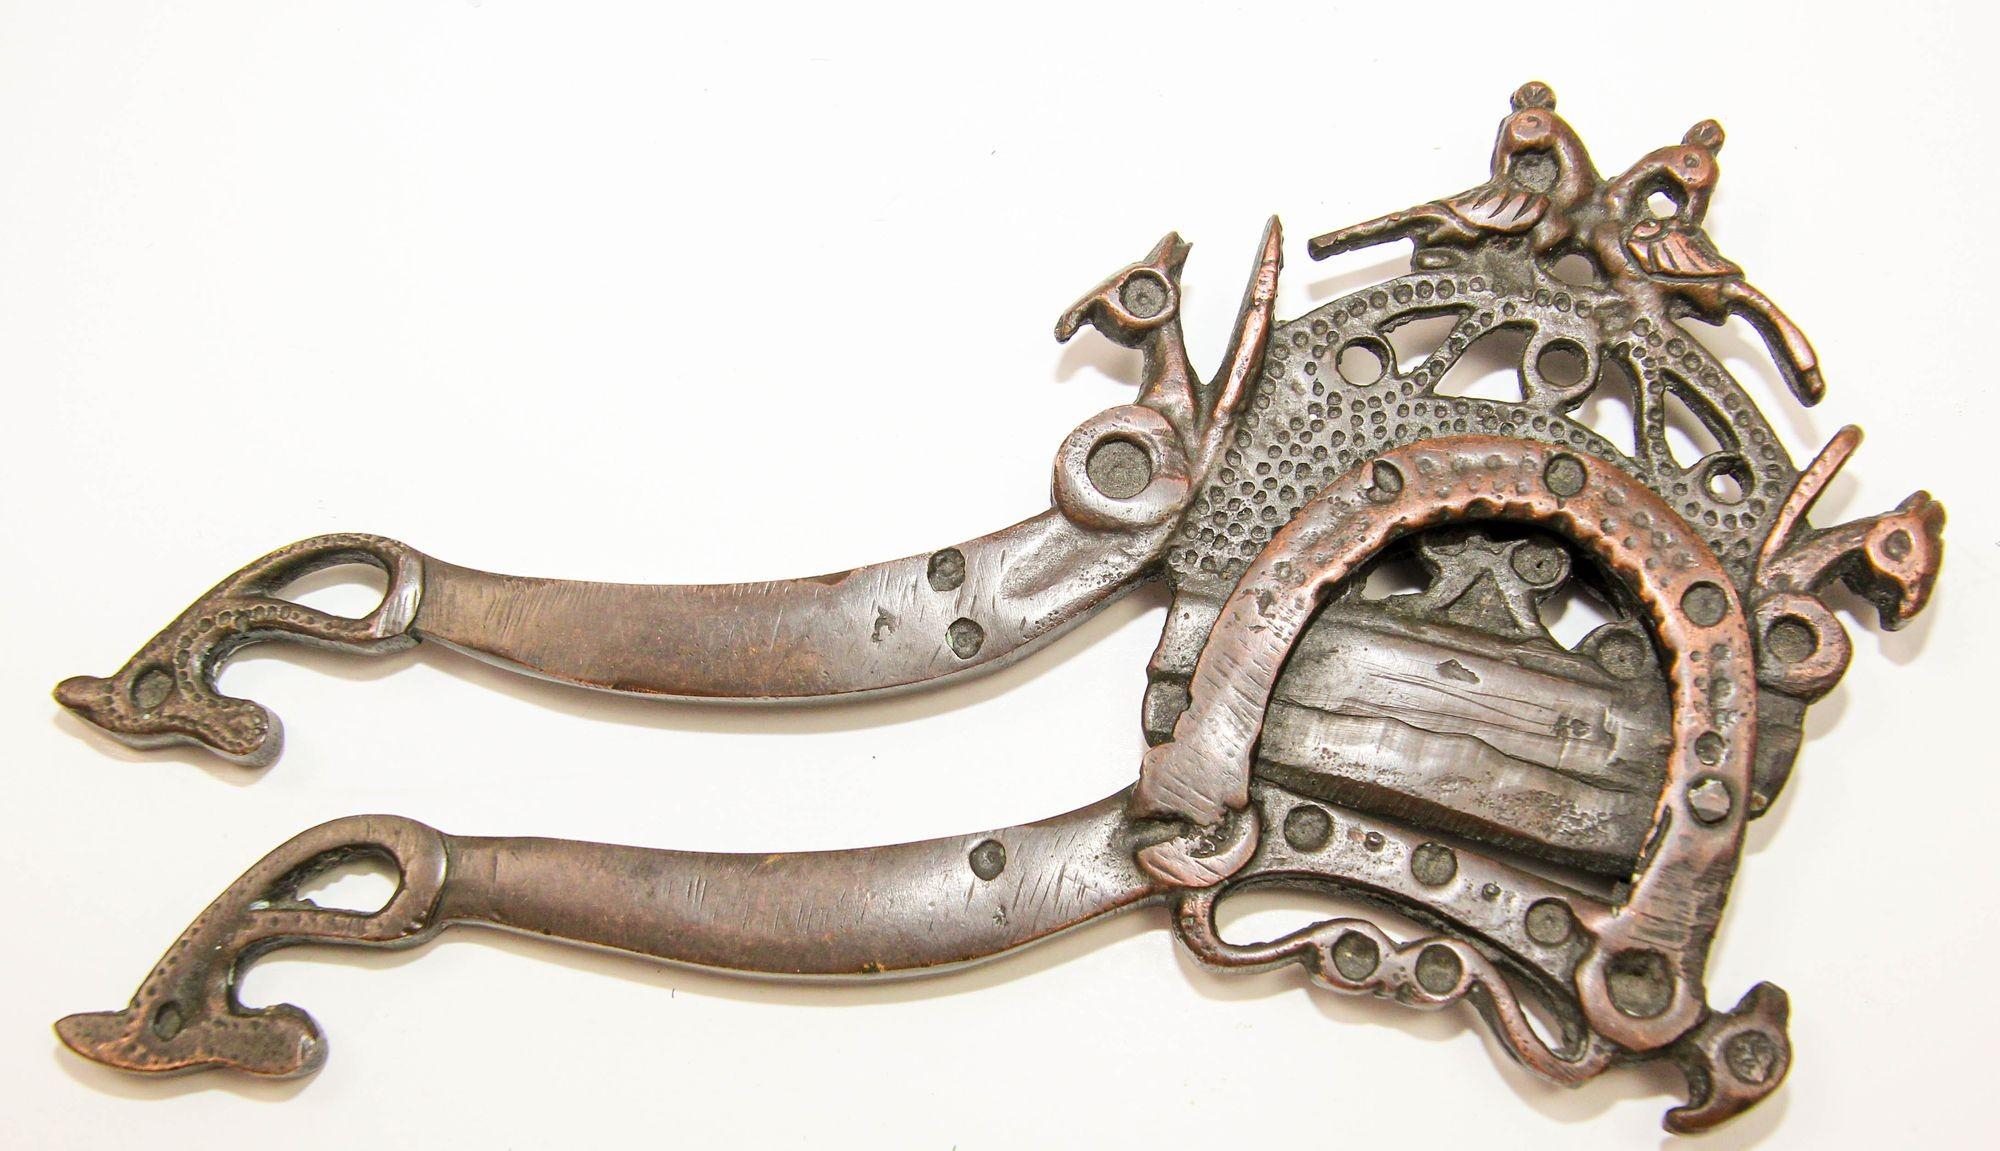 Indian Antique Brass Betel Nut Cutter from India Collectible Asian Artifact For Sale